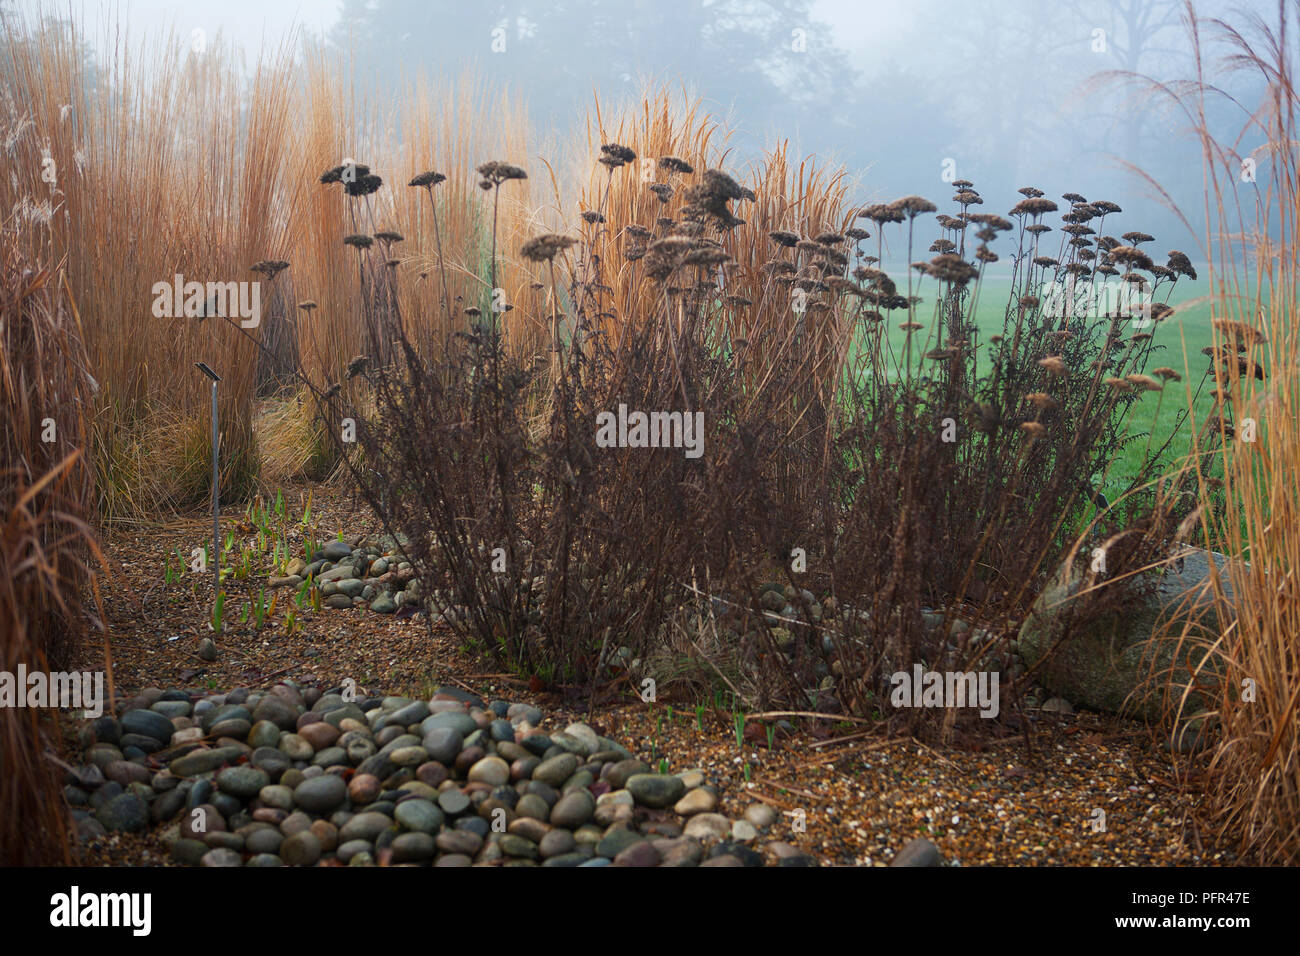 Achillea seedheads in winter border with grasses Stock Photo